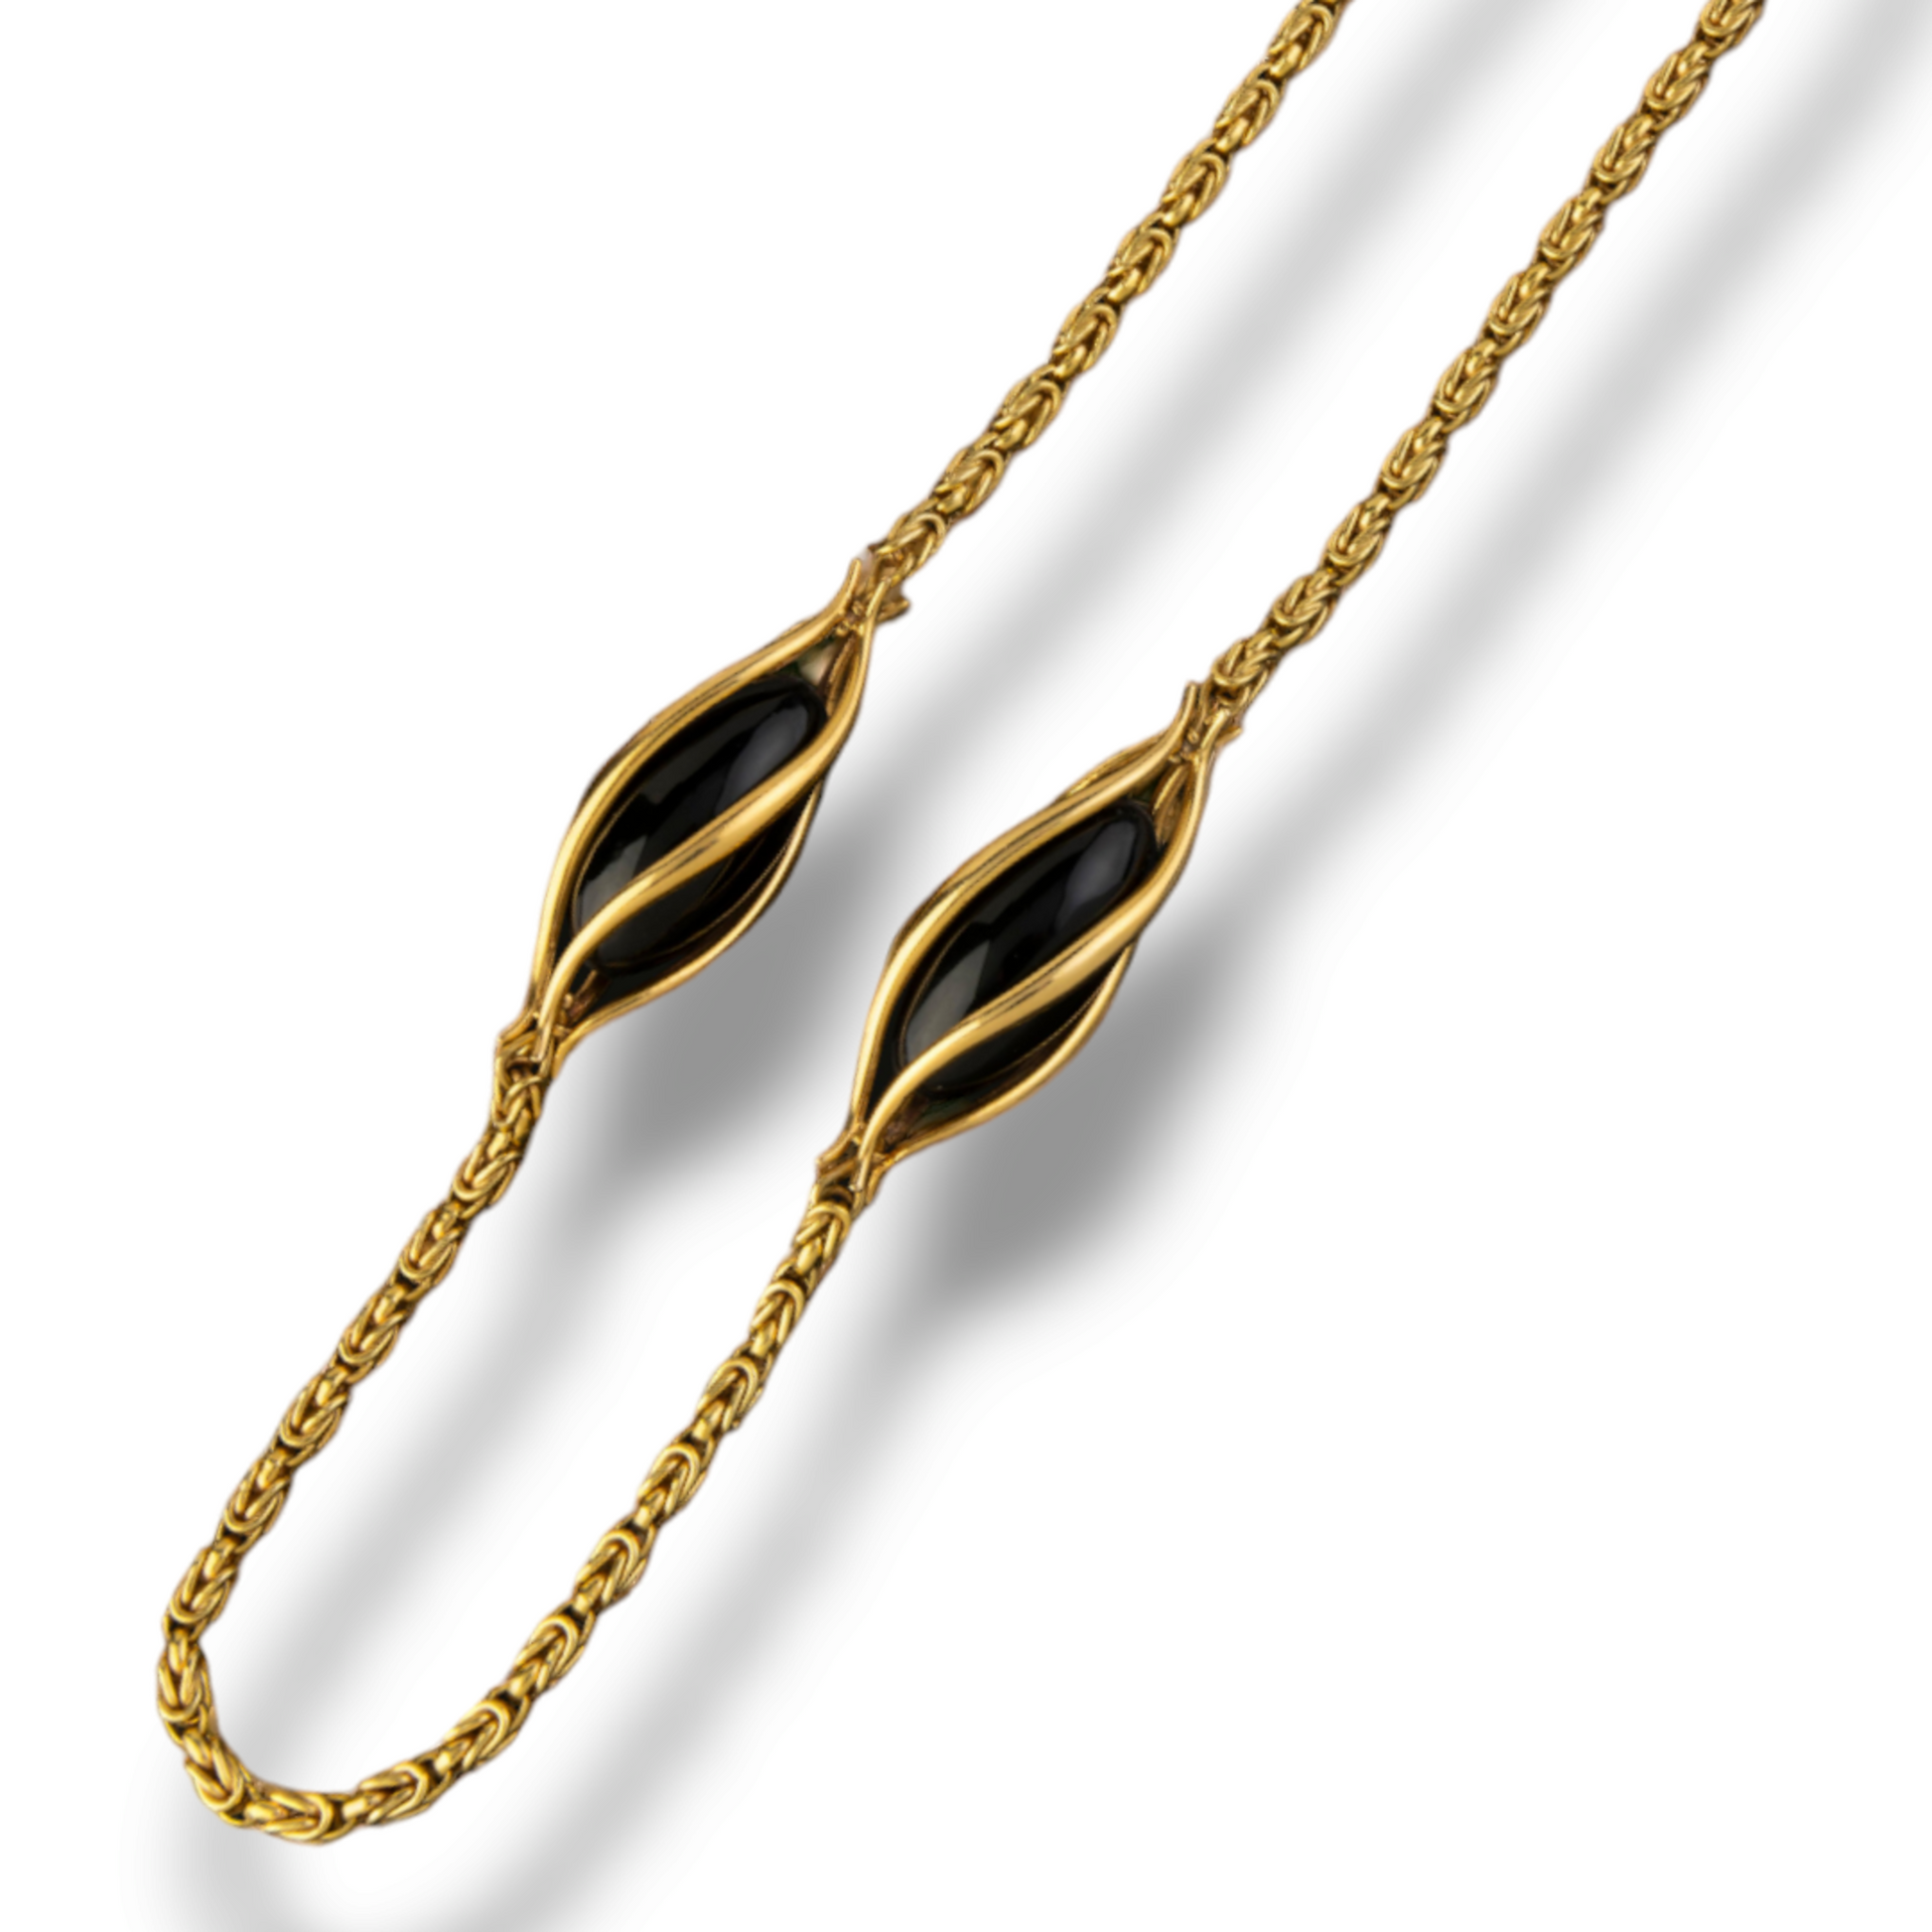 Bucherer 1970s 18KT Yellow Gold Onyx Byzantine Link Chain Necklace close-up front